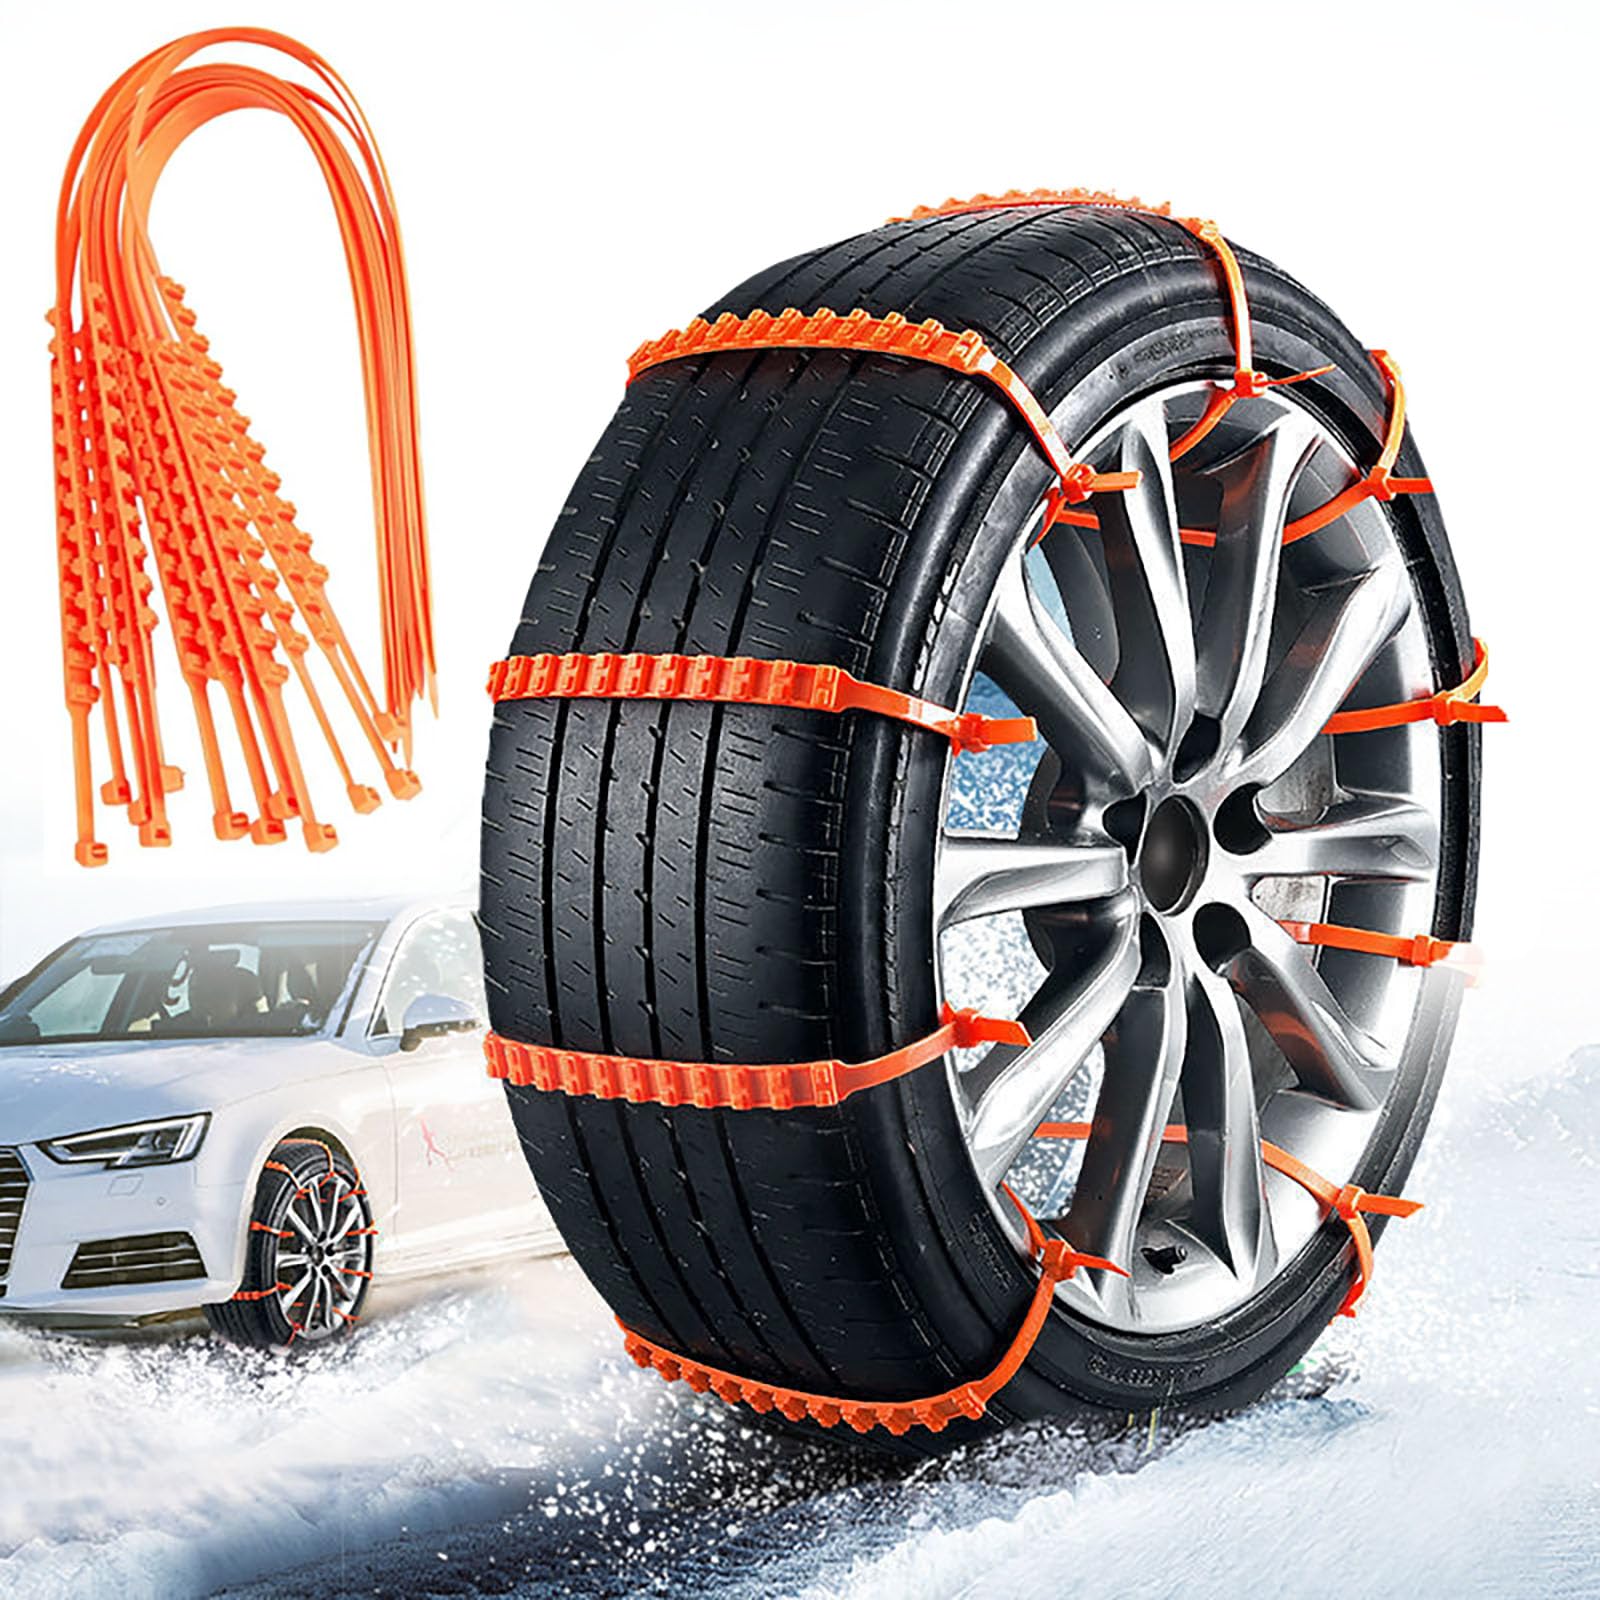 Auto Reifen Schneekette Anti Rutsch, Universal Snow Chains for Car Tires, Car Tire Snow Chains Zip Tie - Reliable All-weather Traction and Grip - Easy to Install, Reusable, and Versatile (20 Pcs) von Qosigote